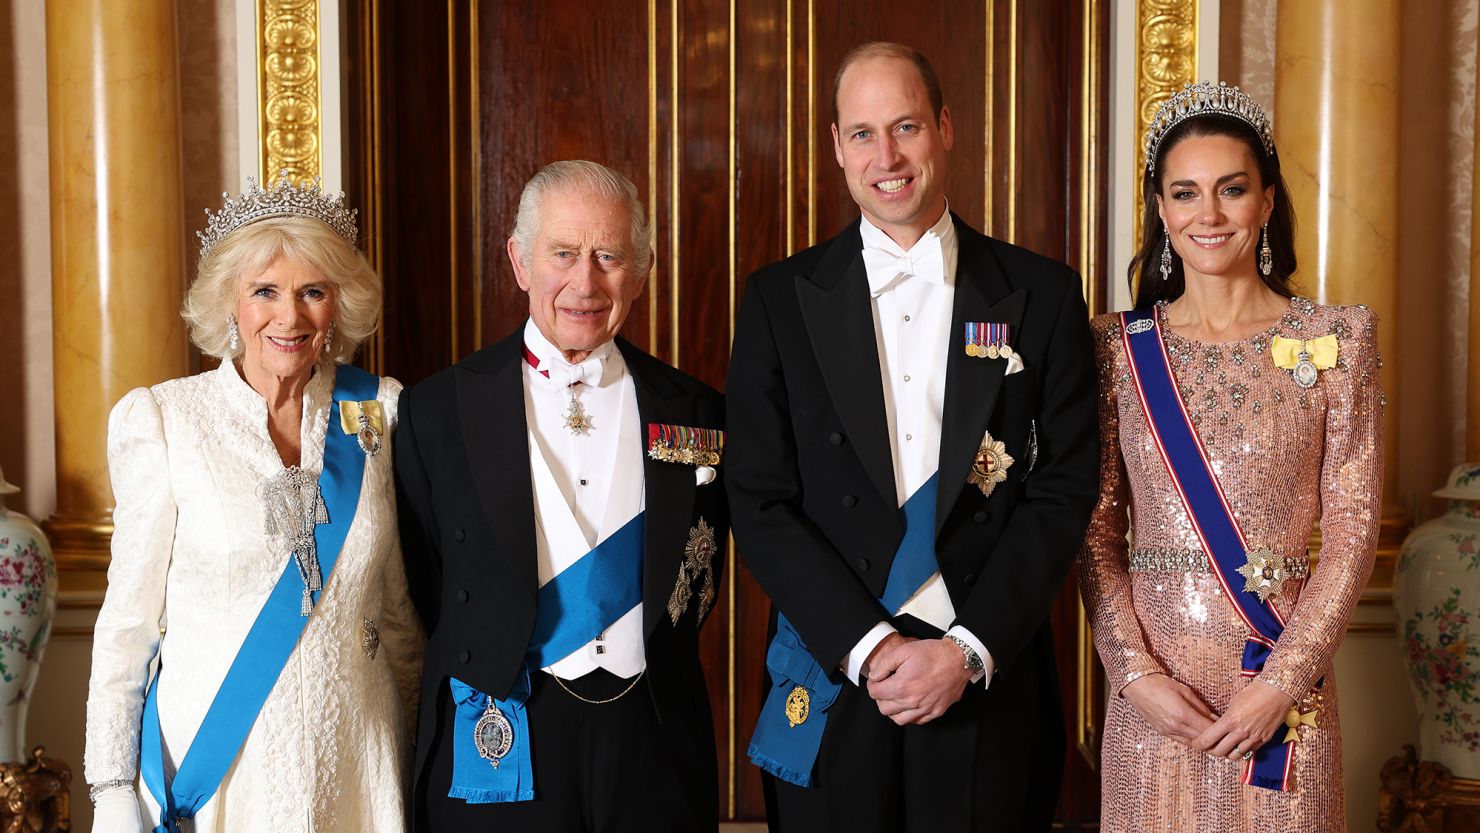 King Charles and Queen Camilla pose with the Prince and Princess of Wales ahead of the Diplomatic Reception in the 1844 Room at Buckingham Palace on December 5.